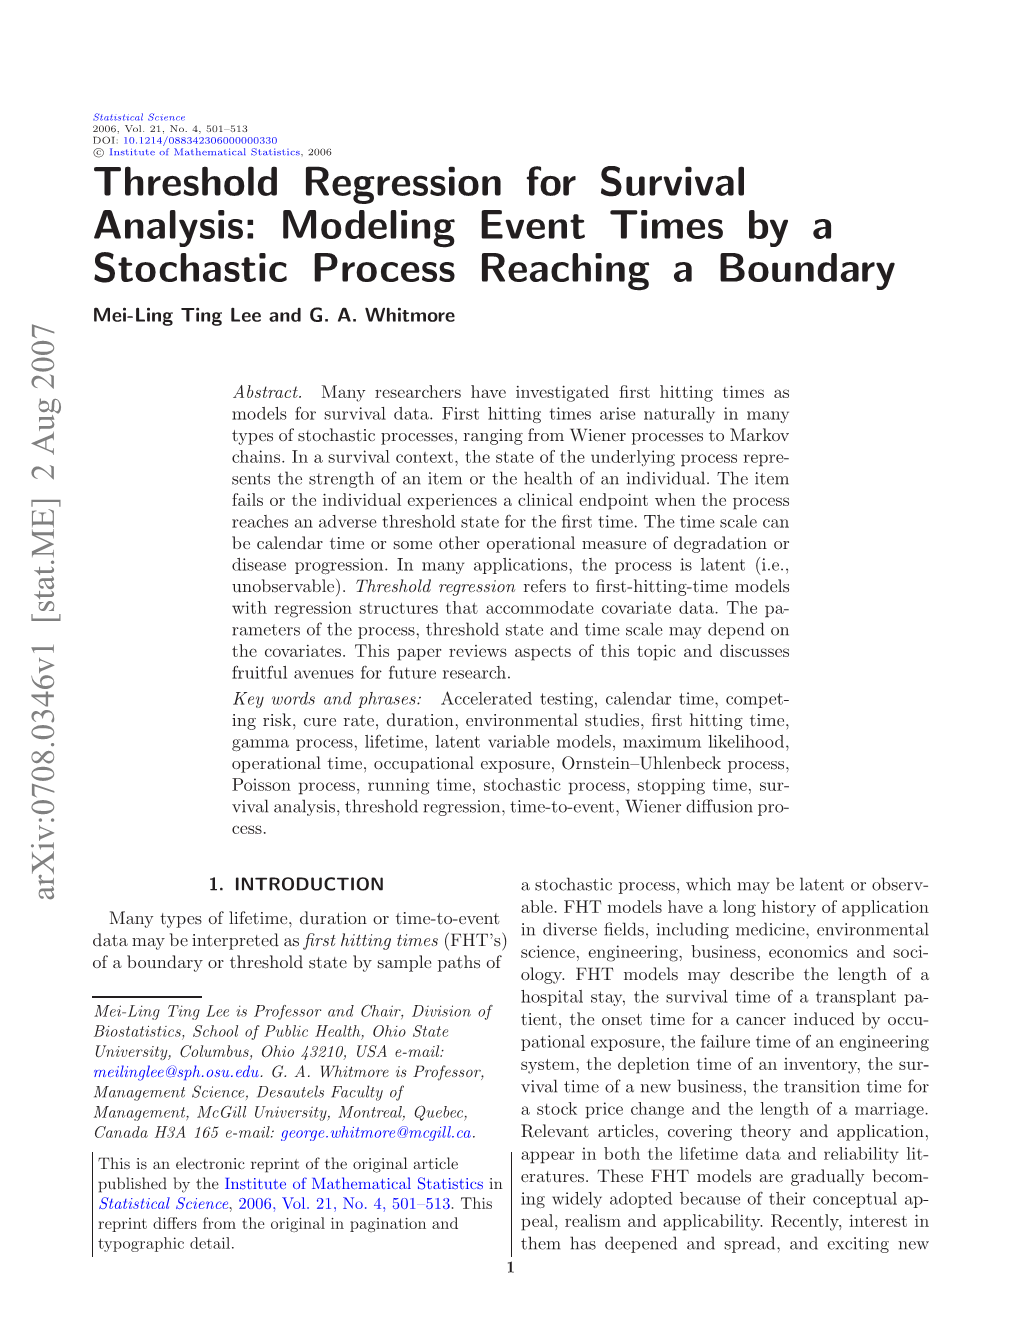 Threshold Regression for Survival Analysis: Modeling Event Times by a Stochastic Process Reaching a Boundary